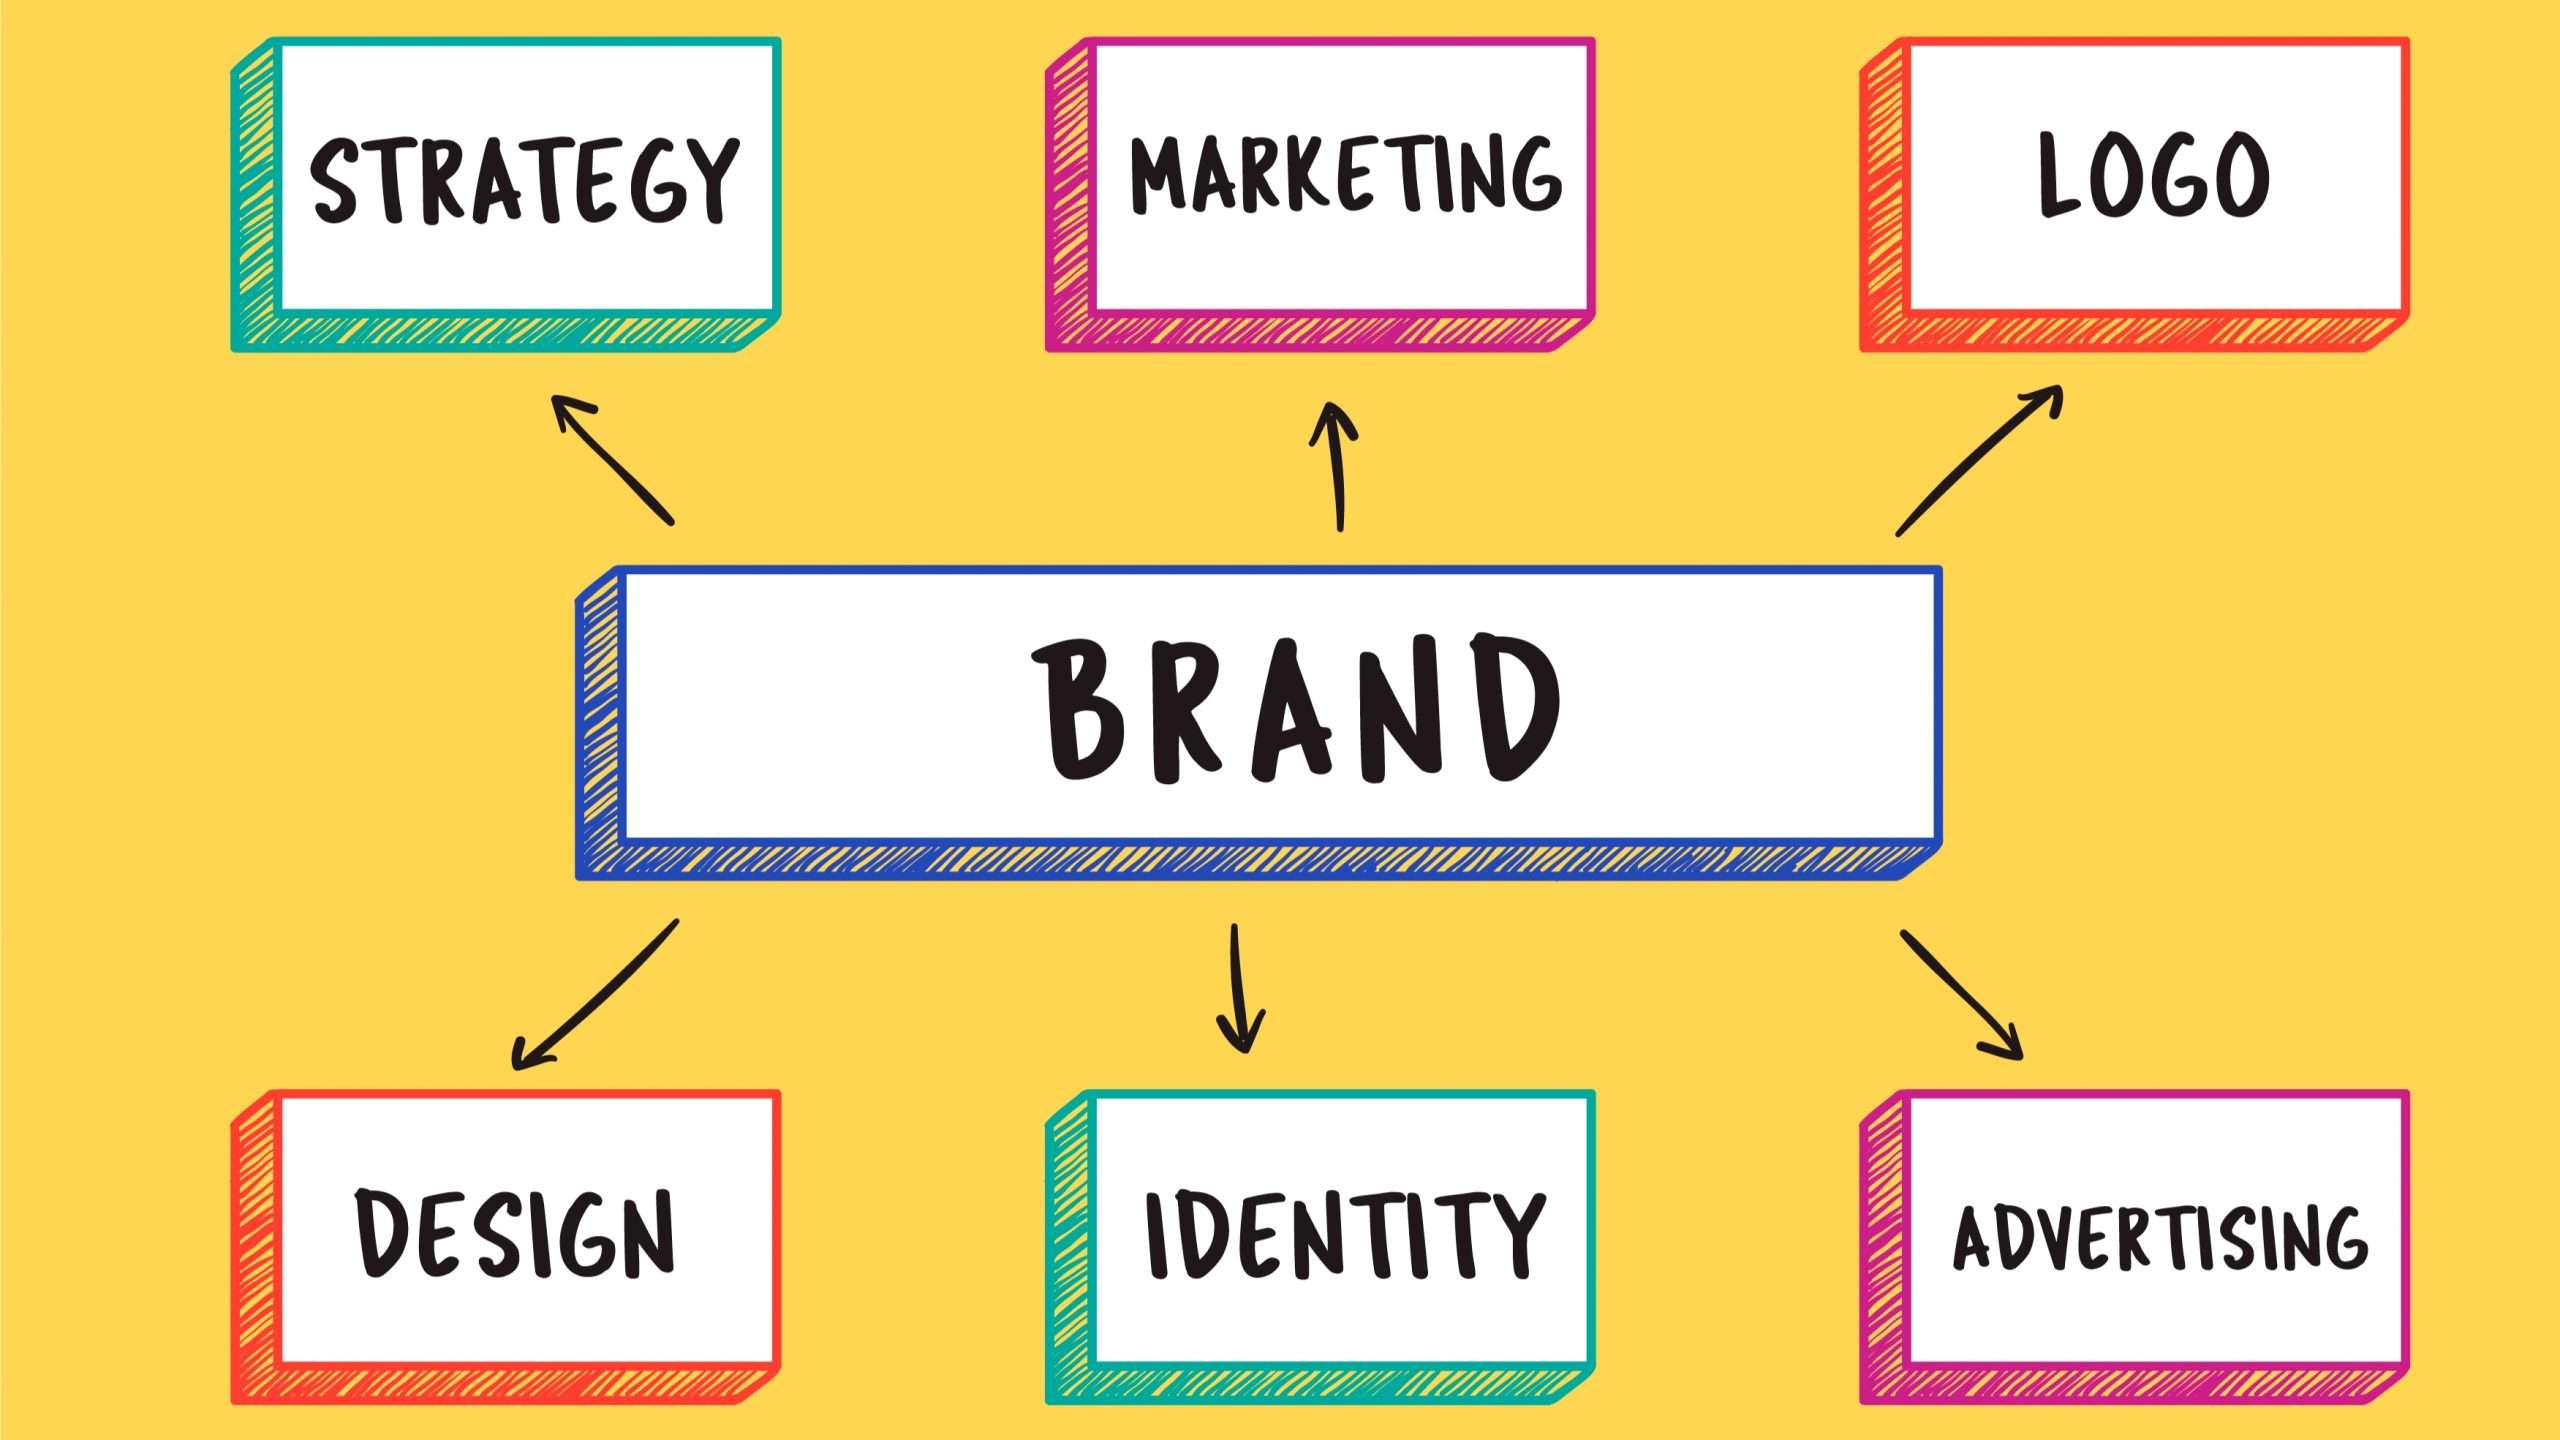 Brand vs Business by Definitions